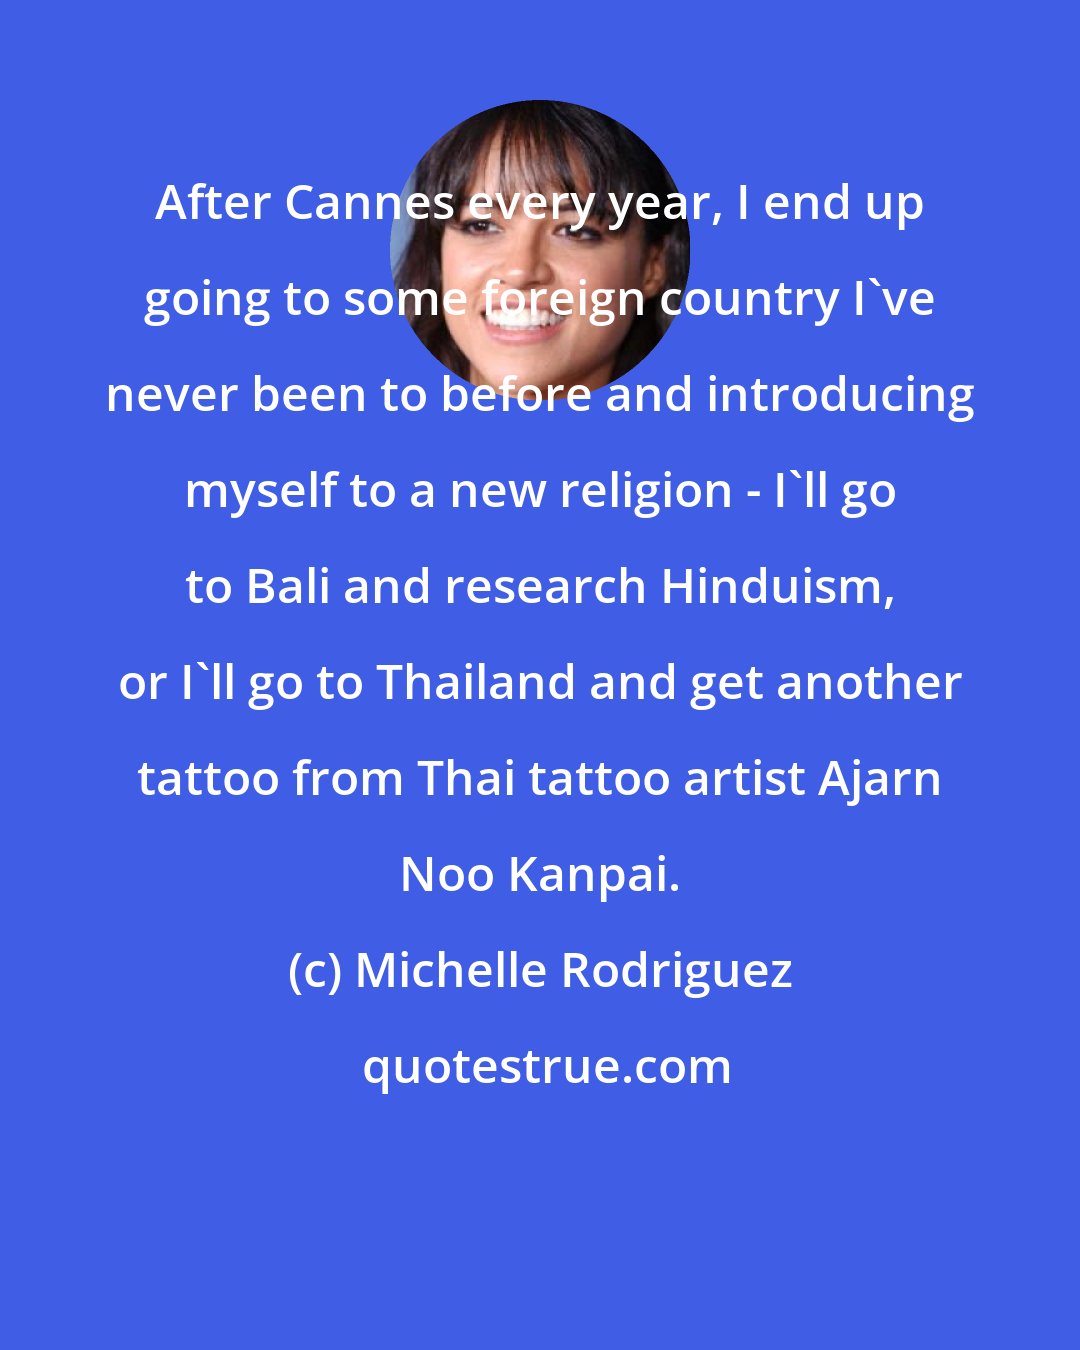 Michelle Rodriguez: After Cannes every year, I end up going to some foreign country I've never been to before and introducing myself to a new religion - I'll go to Bali and research Hinduism, or I'll go to Thailand and get another tattoo from Thai tattoo artist Ajarn Noo Kanpai.